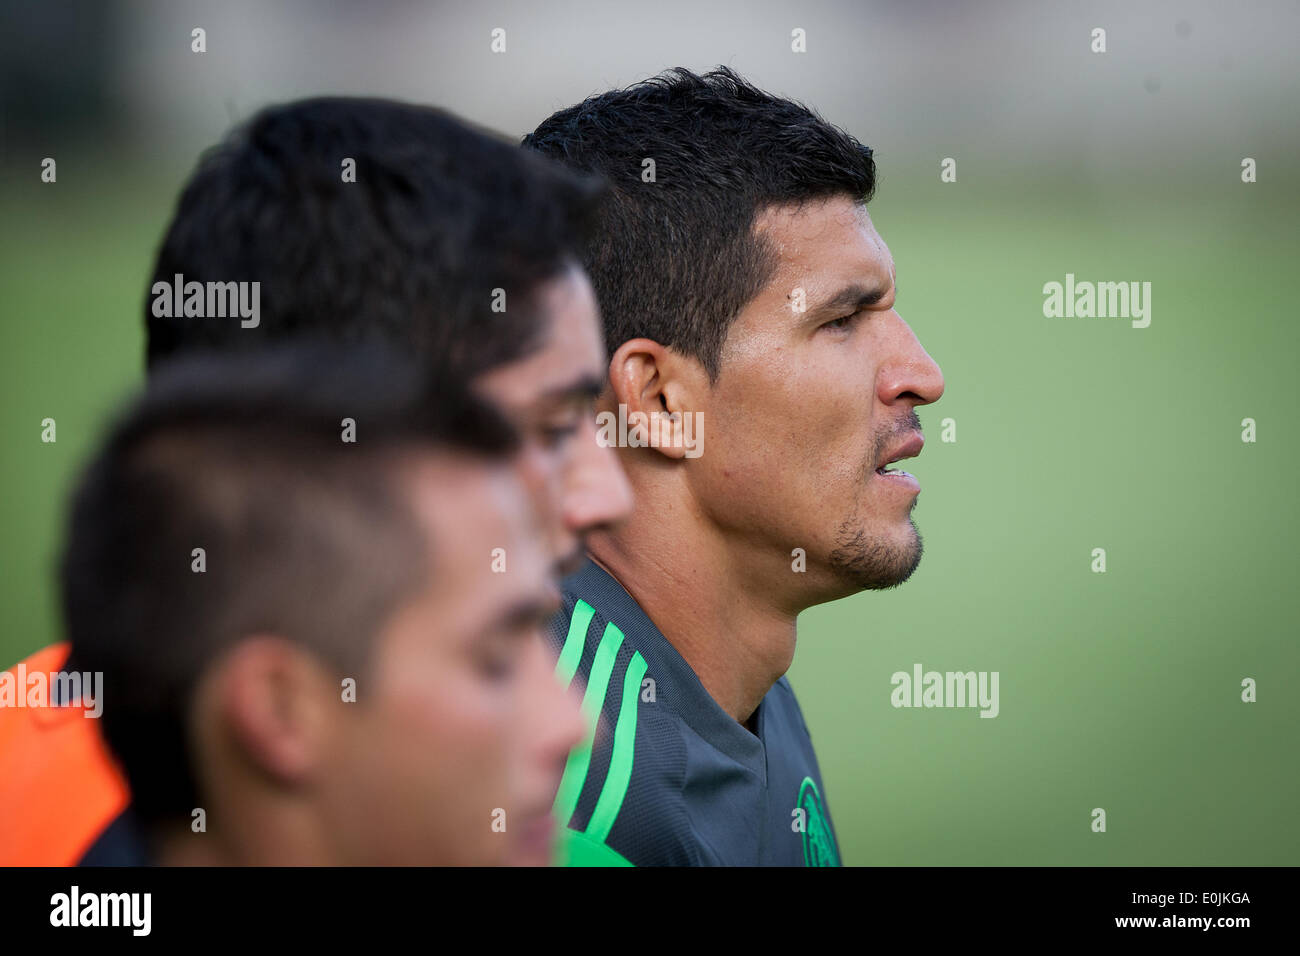 Mexico City, Mexico. 14th May, 2014. Francisco Javier Rodriguez (R) from Mexico's national soccer team, takes part in a training session, in Mexico City, capital of Mexico, on May 14, 2014. Credit:  Pedro Mera/Xinhua/Alamy Live News Stock Photo